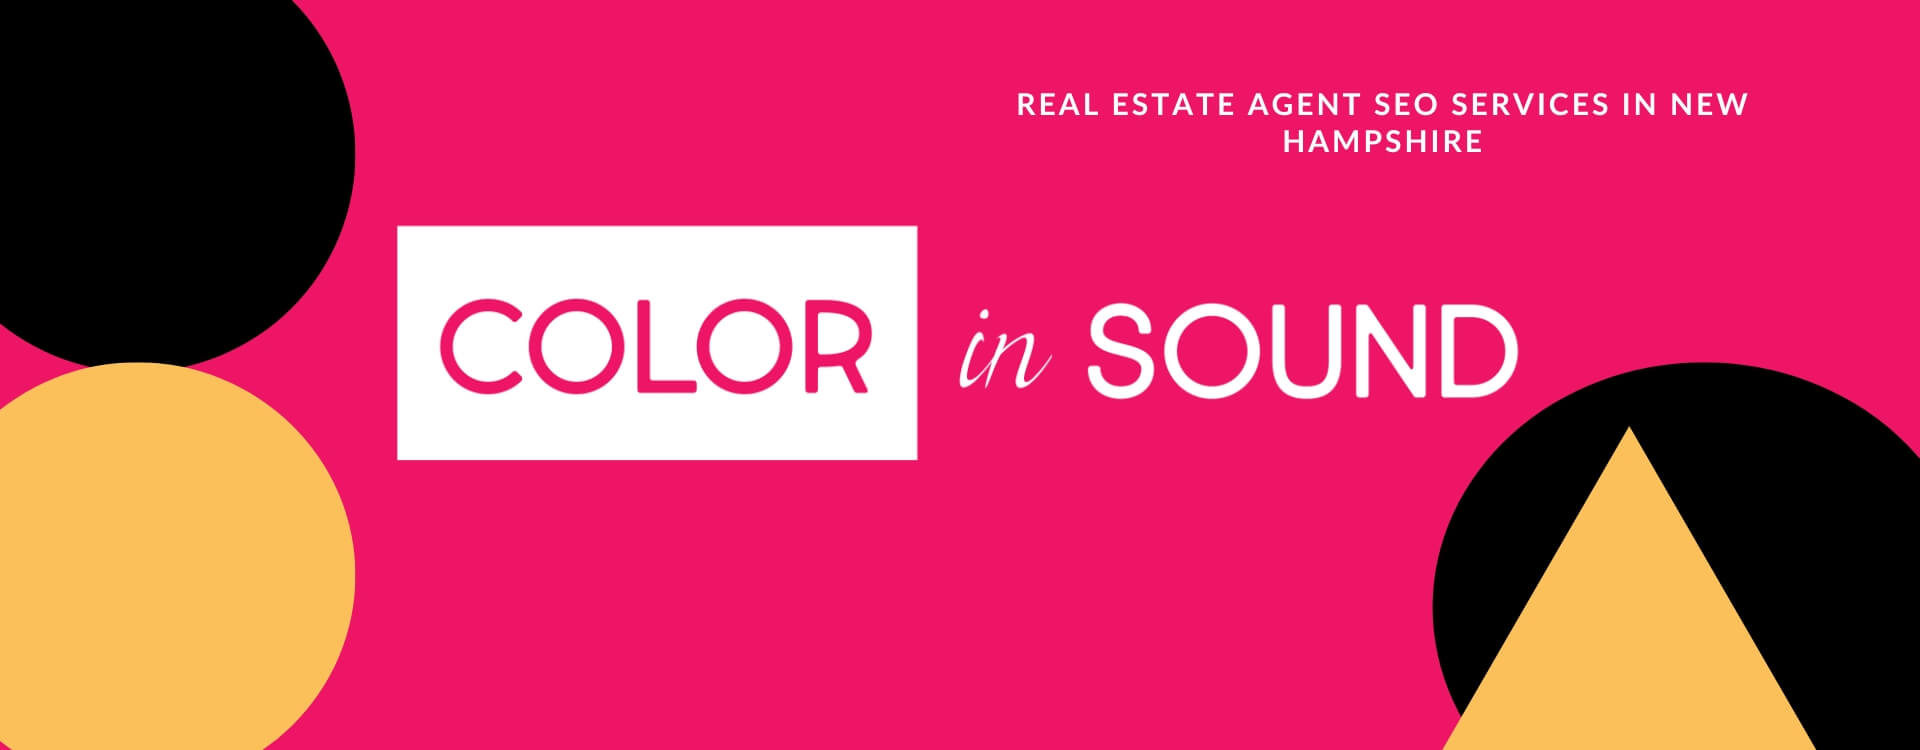 Real Estate Agent SEO Services in New Hampshire